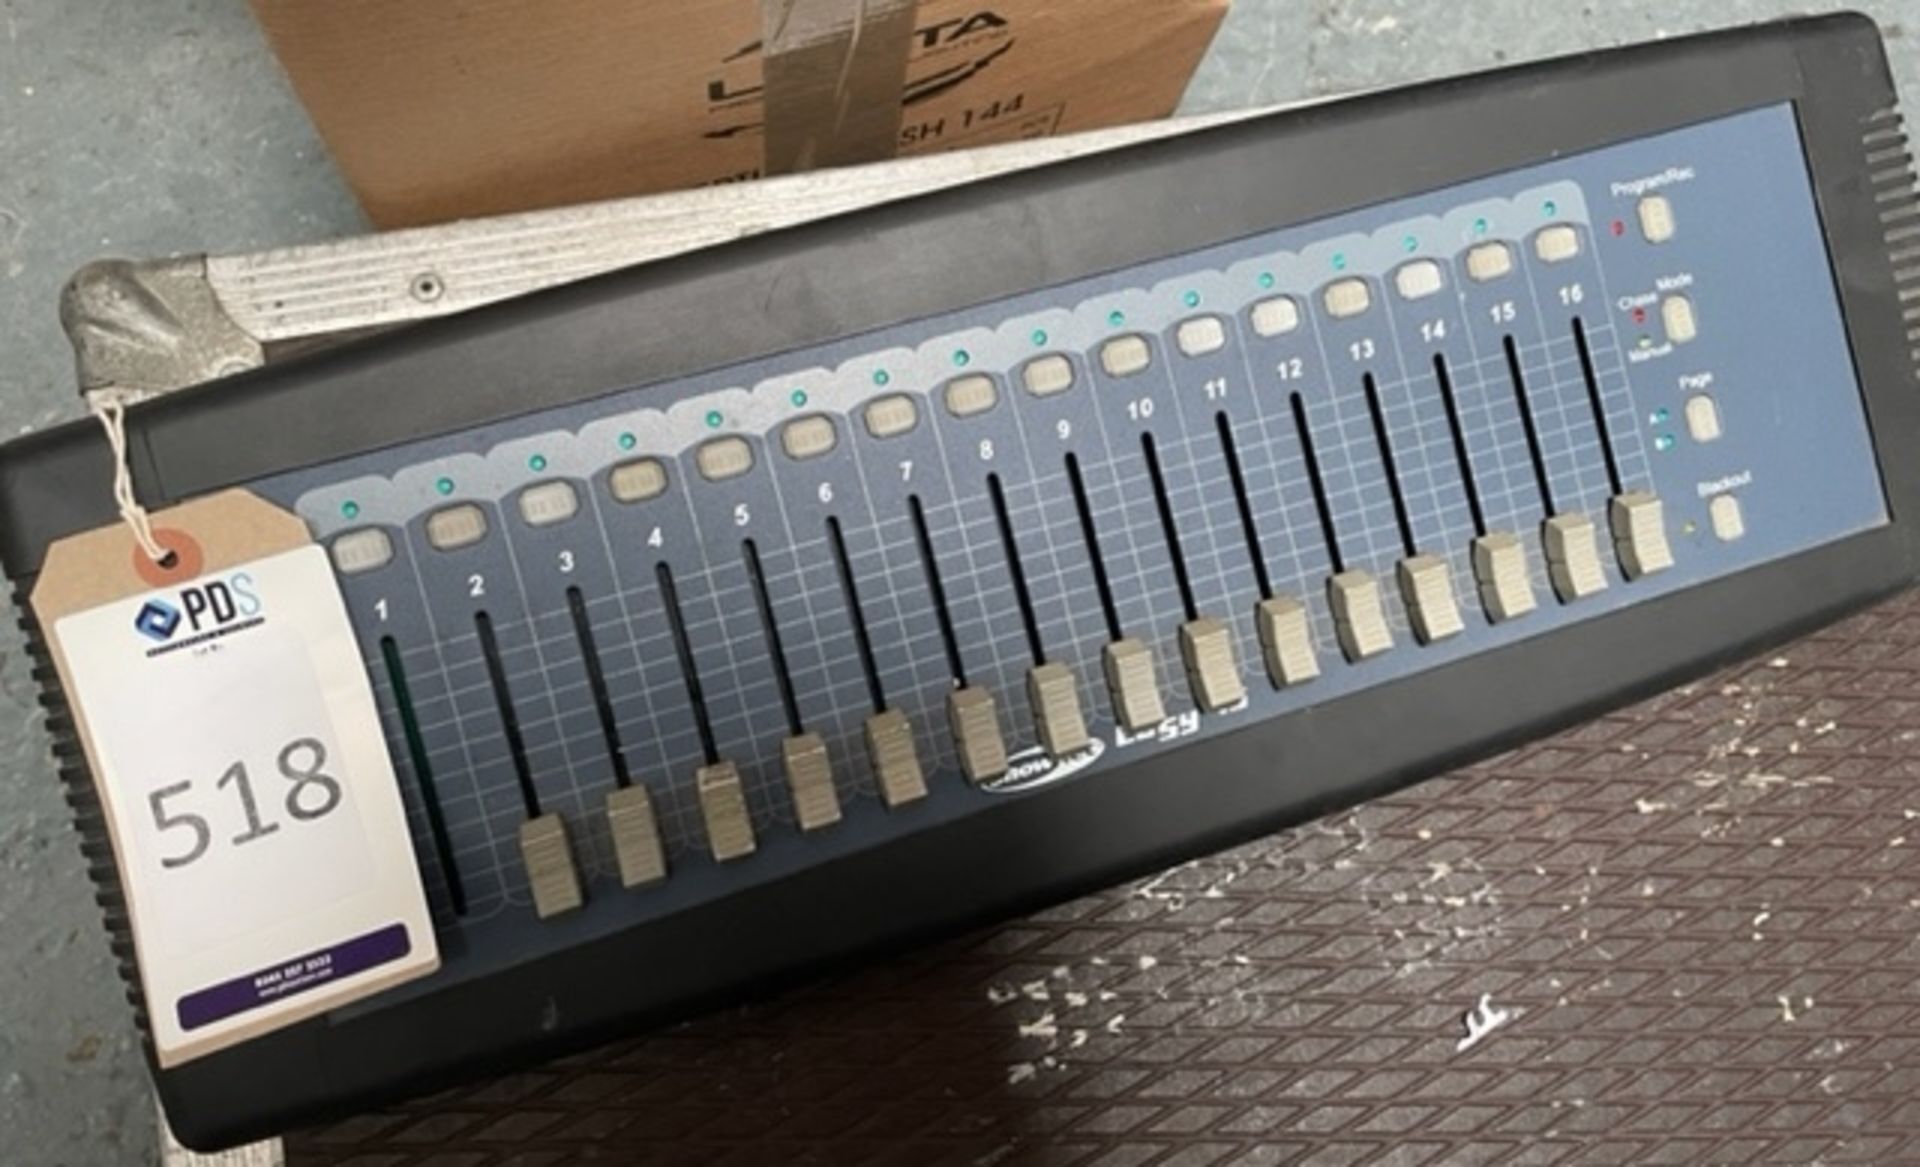 1 Showtec Lighting Control Desk (For Spares or Repair - Some Faders Damaged) (Location